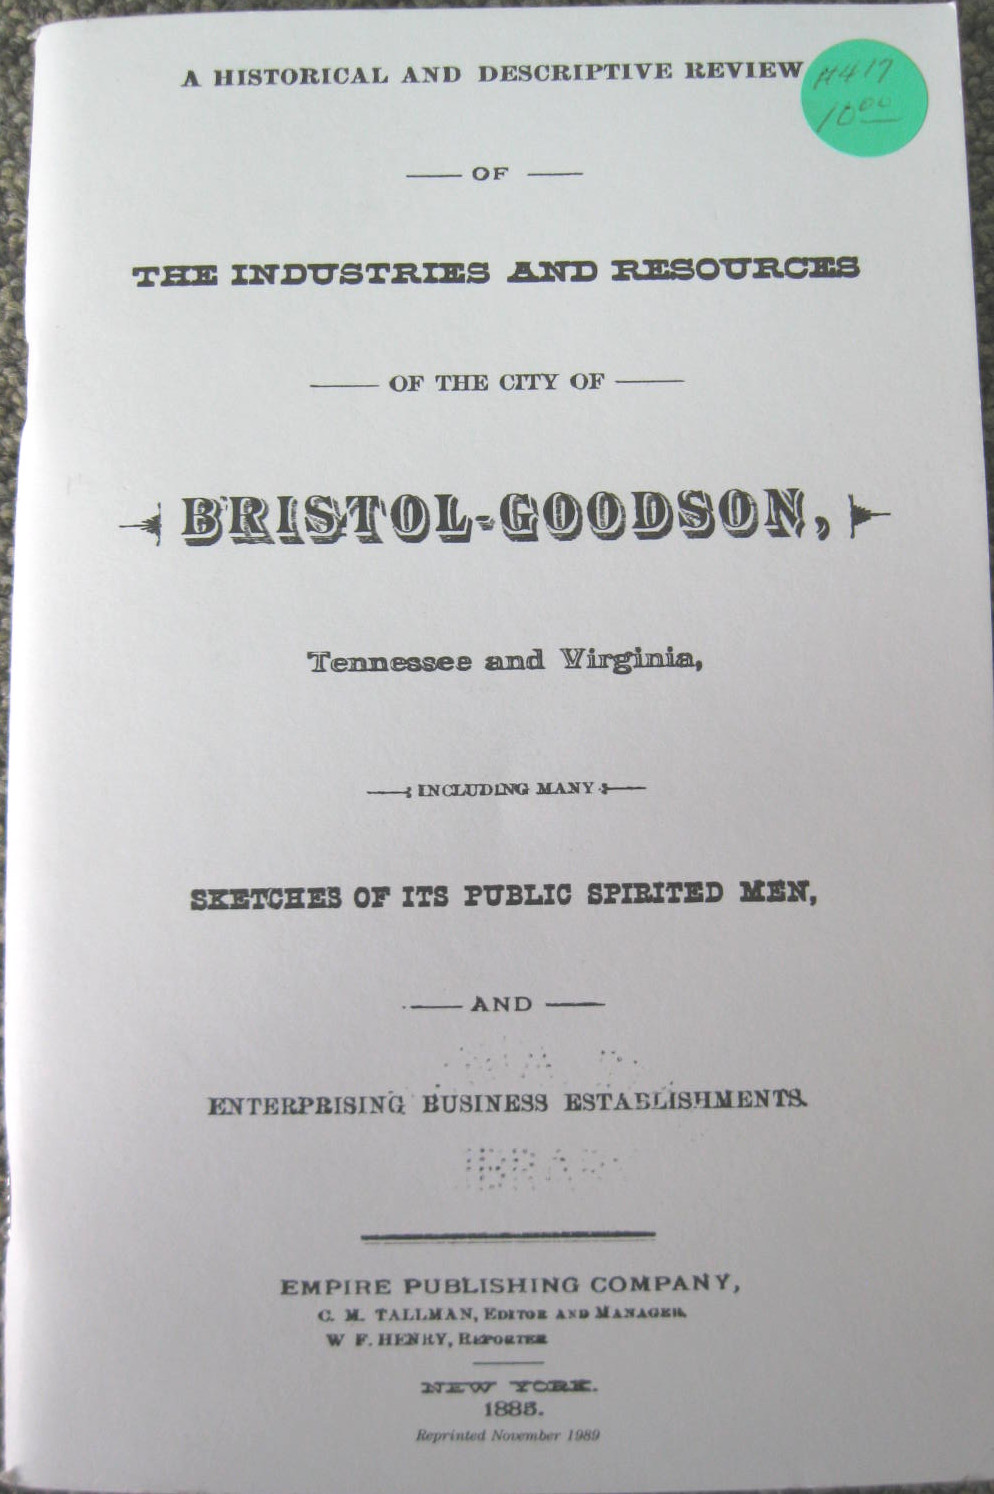 The Industries and Resources of the City of Bristol-Goodson - Tennessee and Virginia. A Historical and Descriptive Review Including Sketches of Its Public Spirited Men and Enterprising Business Establishments